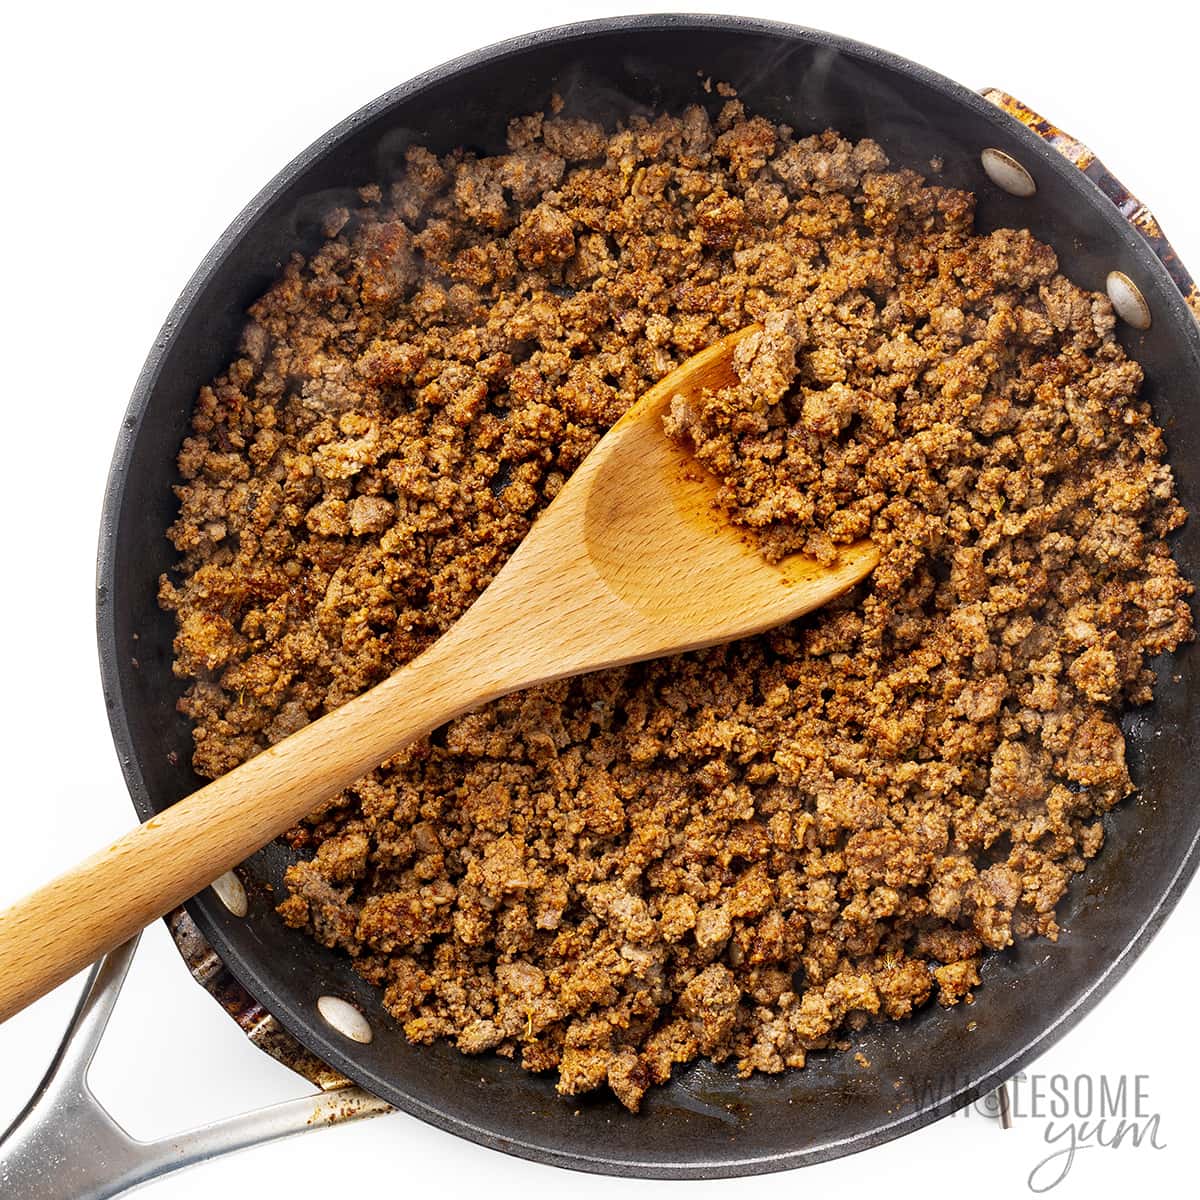 The ground beef is browned in the skillet.